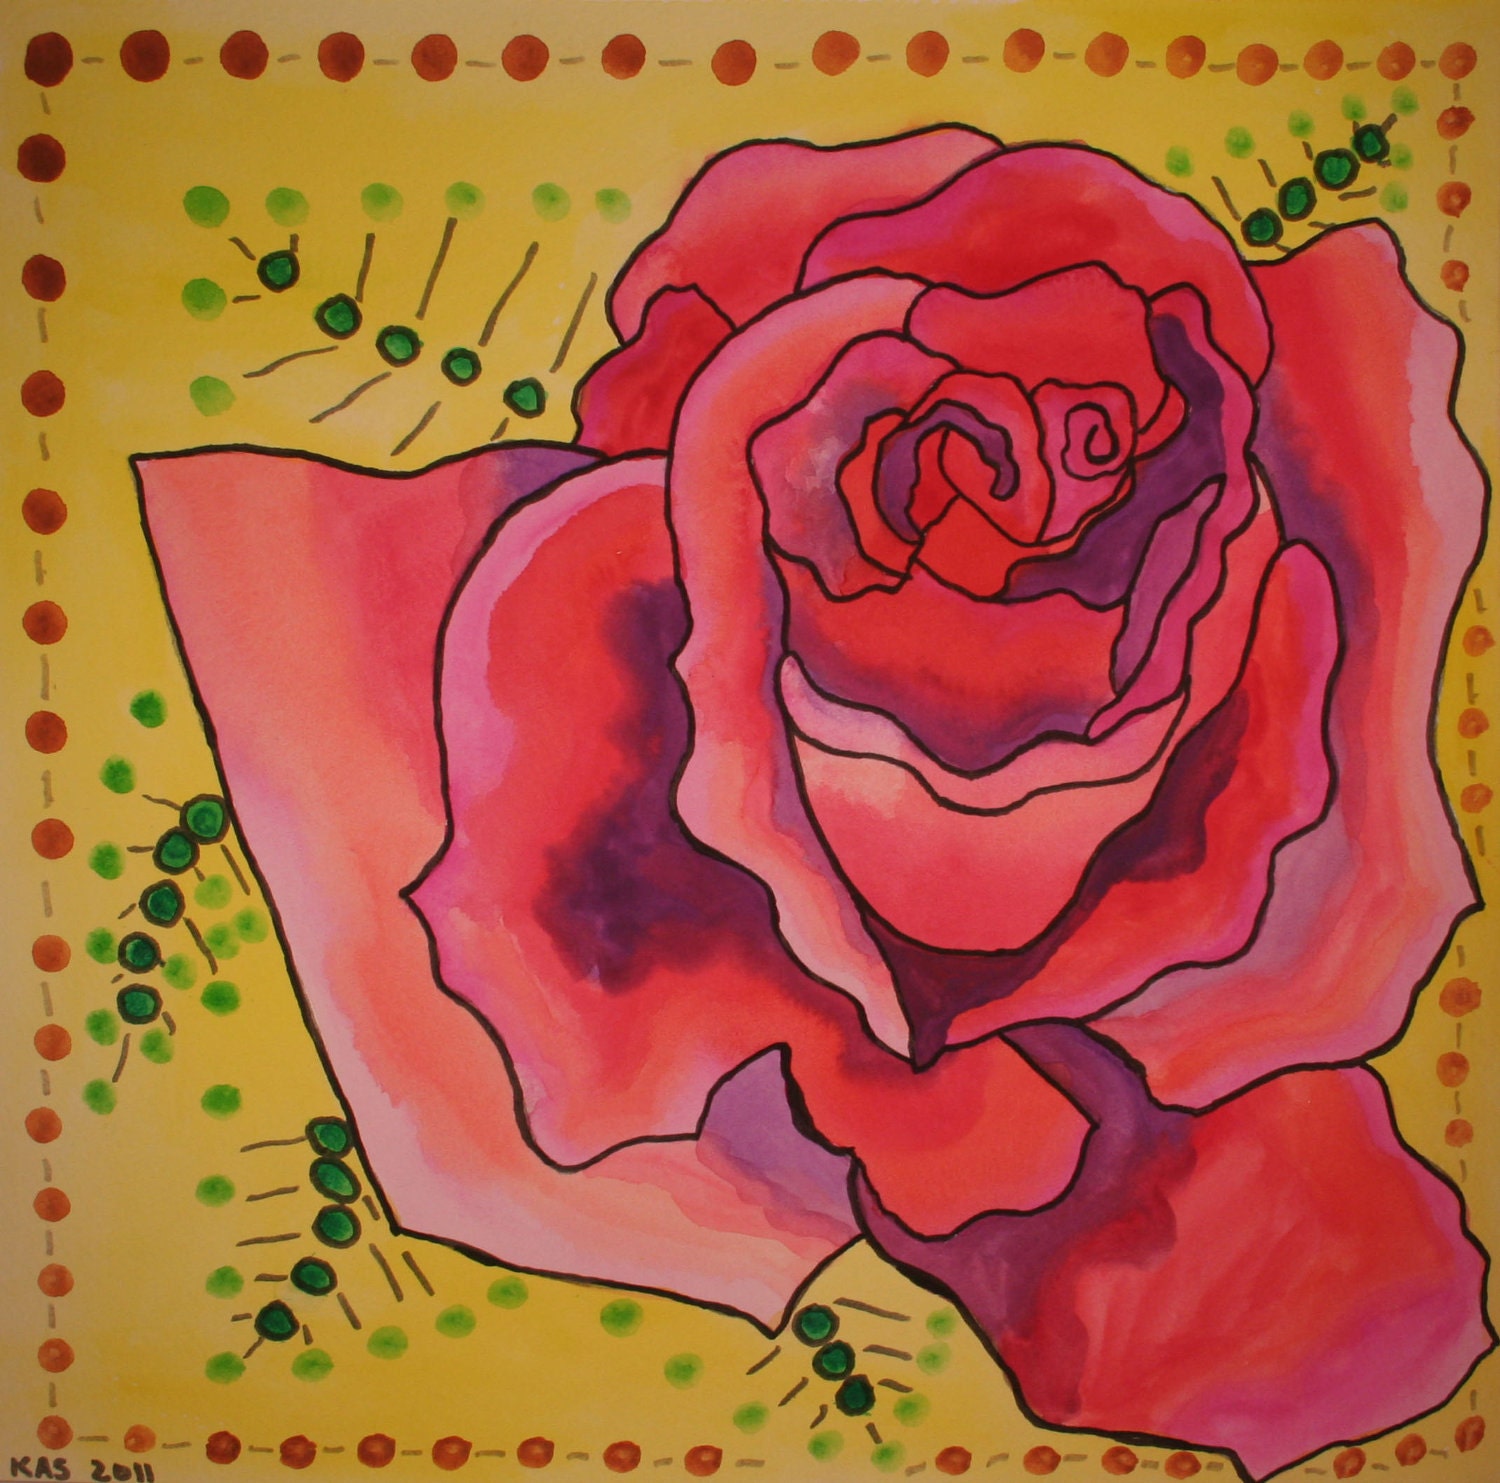 12x12 OOAK Watercolor Painting: Rose of Passion